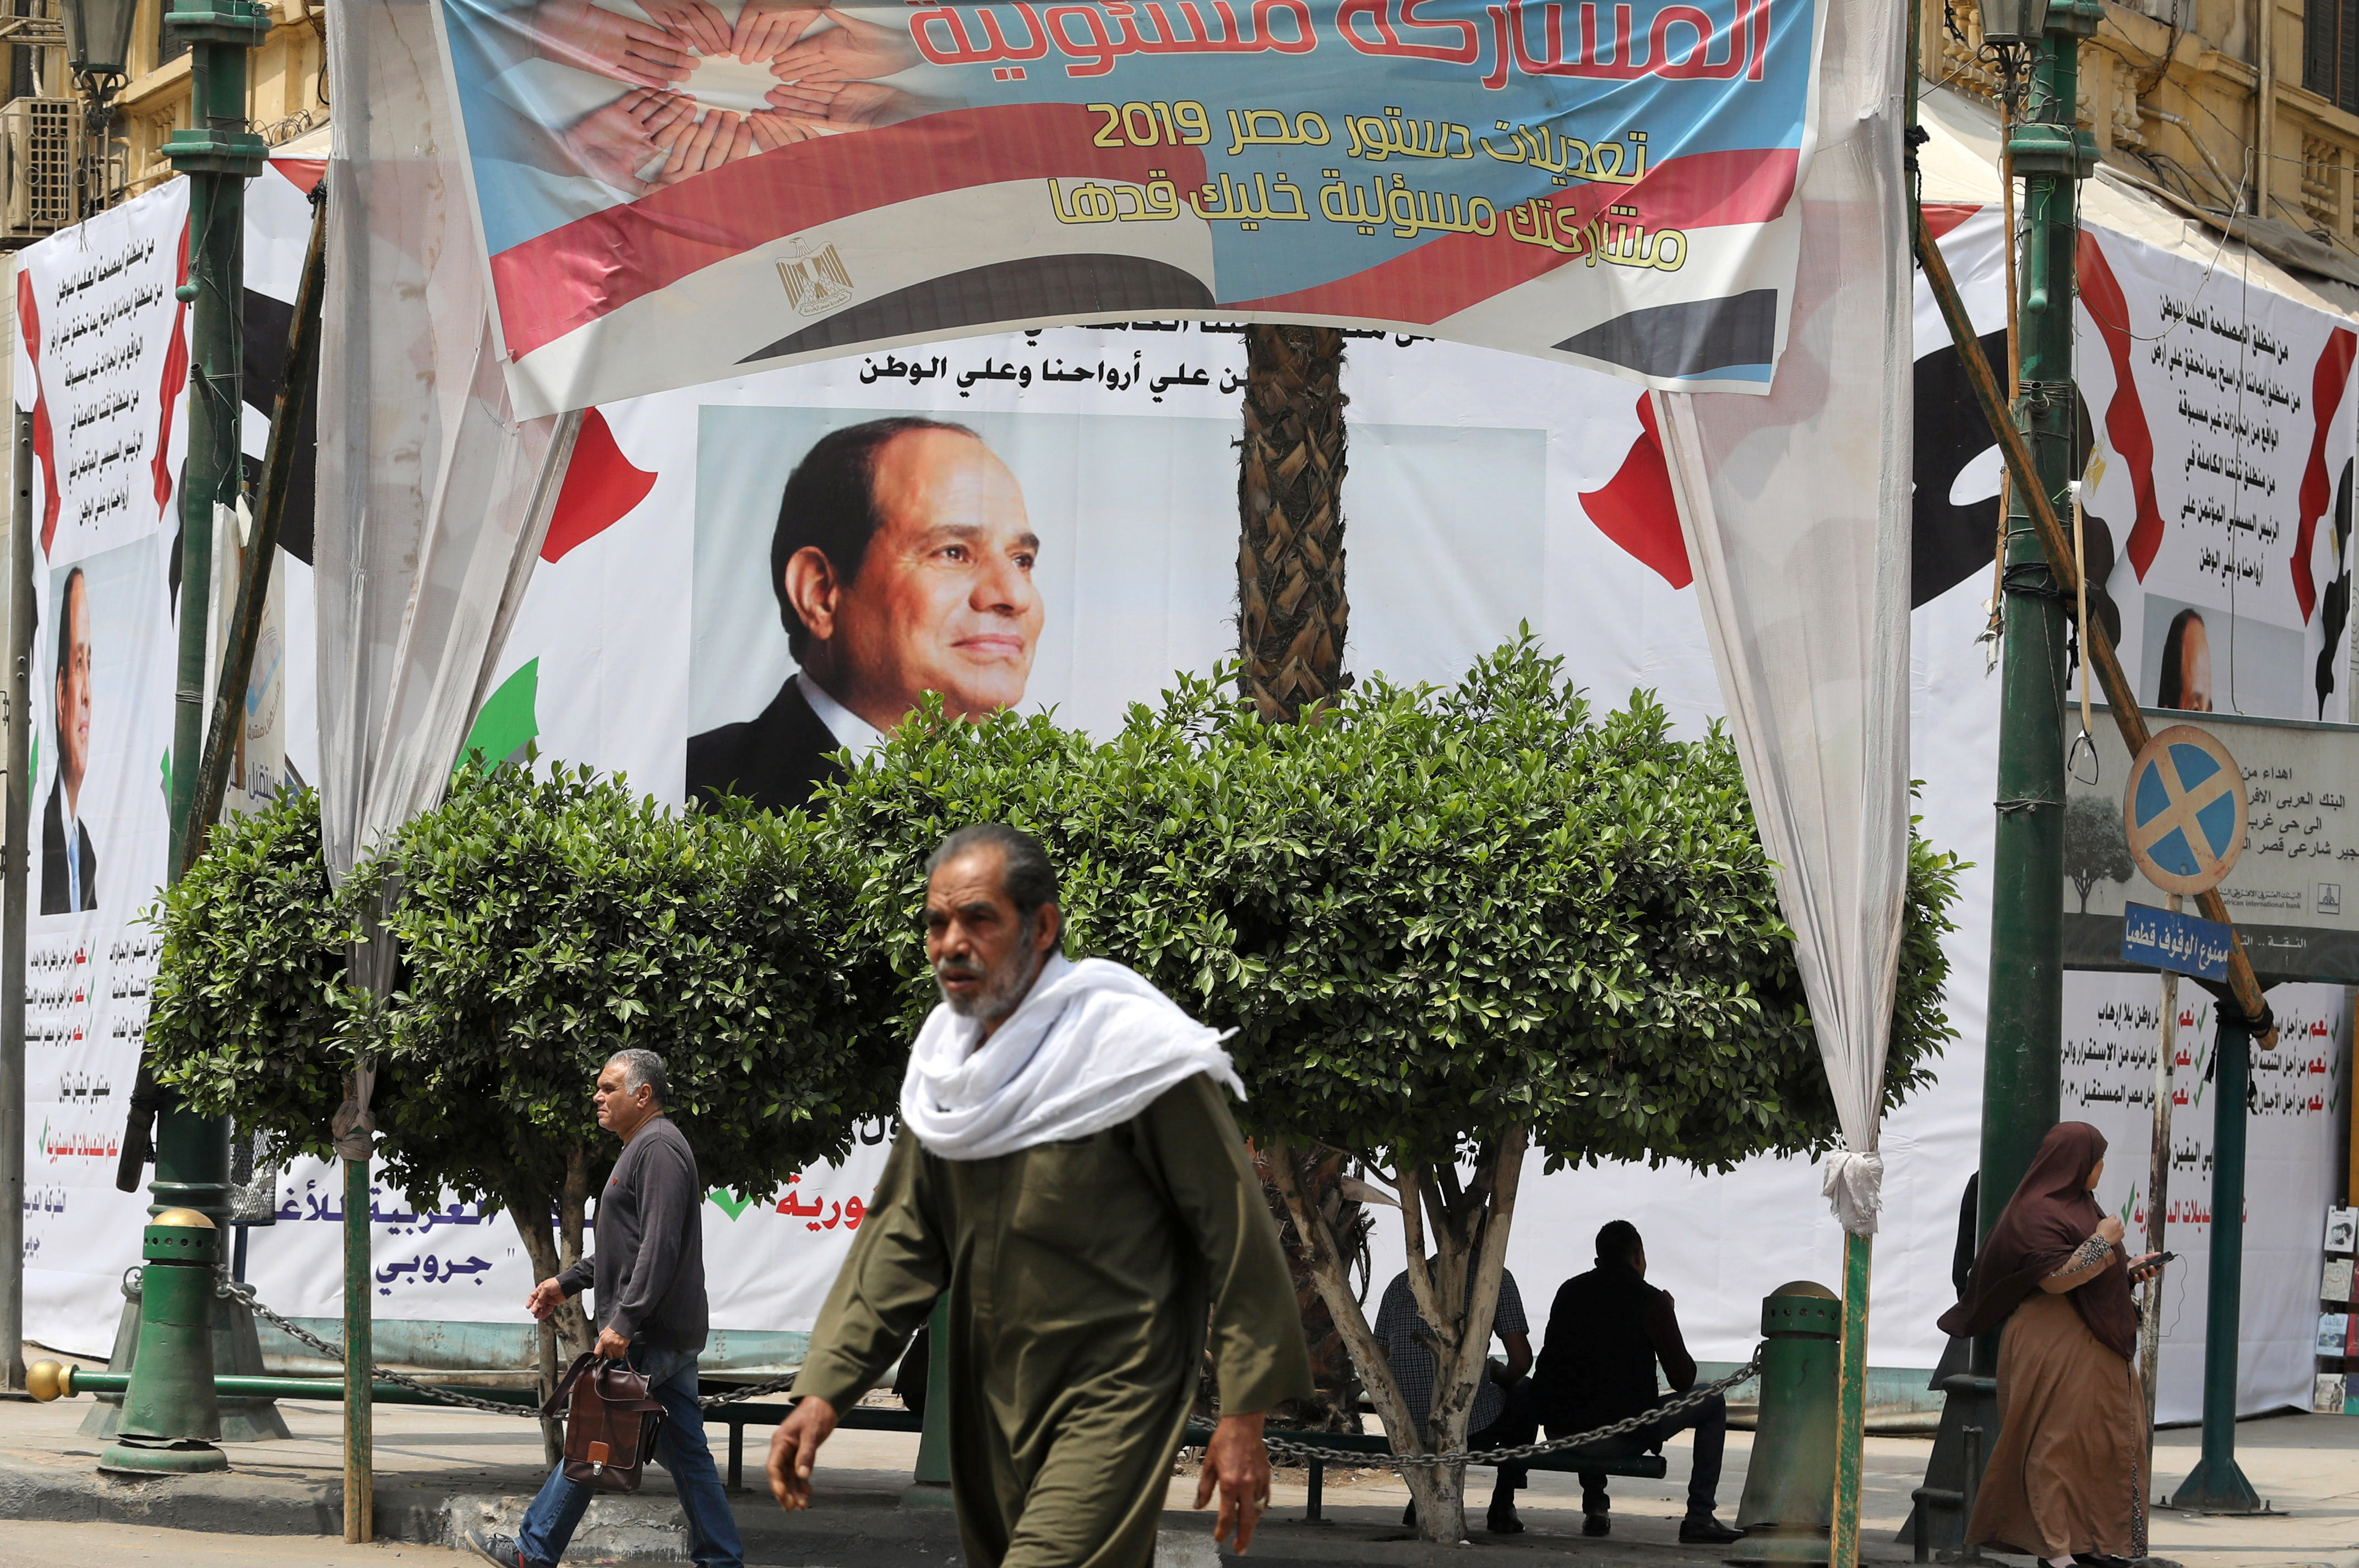 Pedestrians walk in front of a banner of the Egyptian President Abdel Fattah al-Sisi before the upcoming referendum on constitutional amendments in Cairo, Egypt April 16, 2019. REUTERS/Mohamed Abd El Ghany - RC125CB524E0